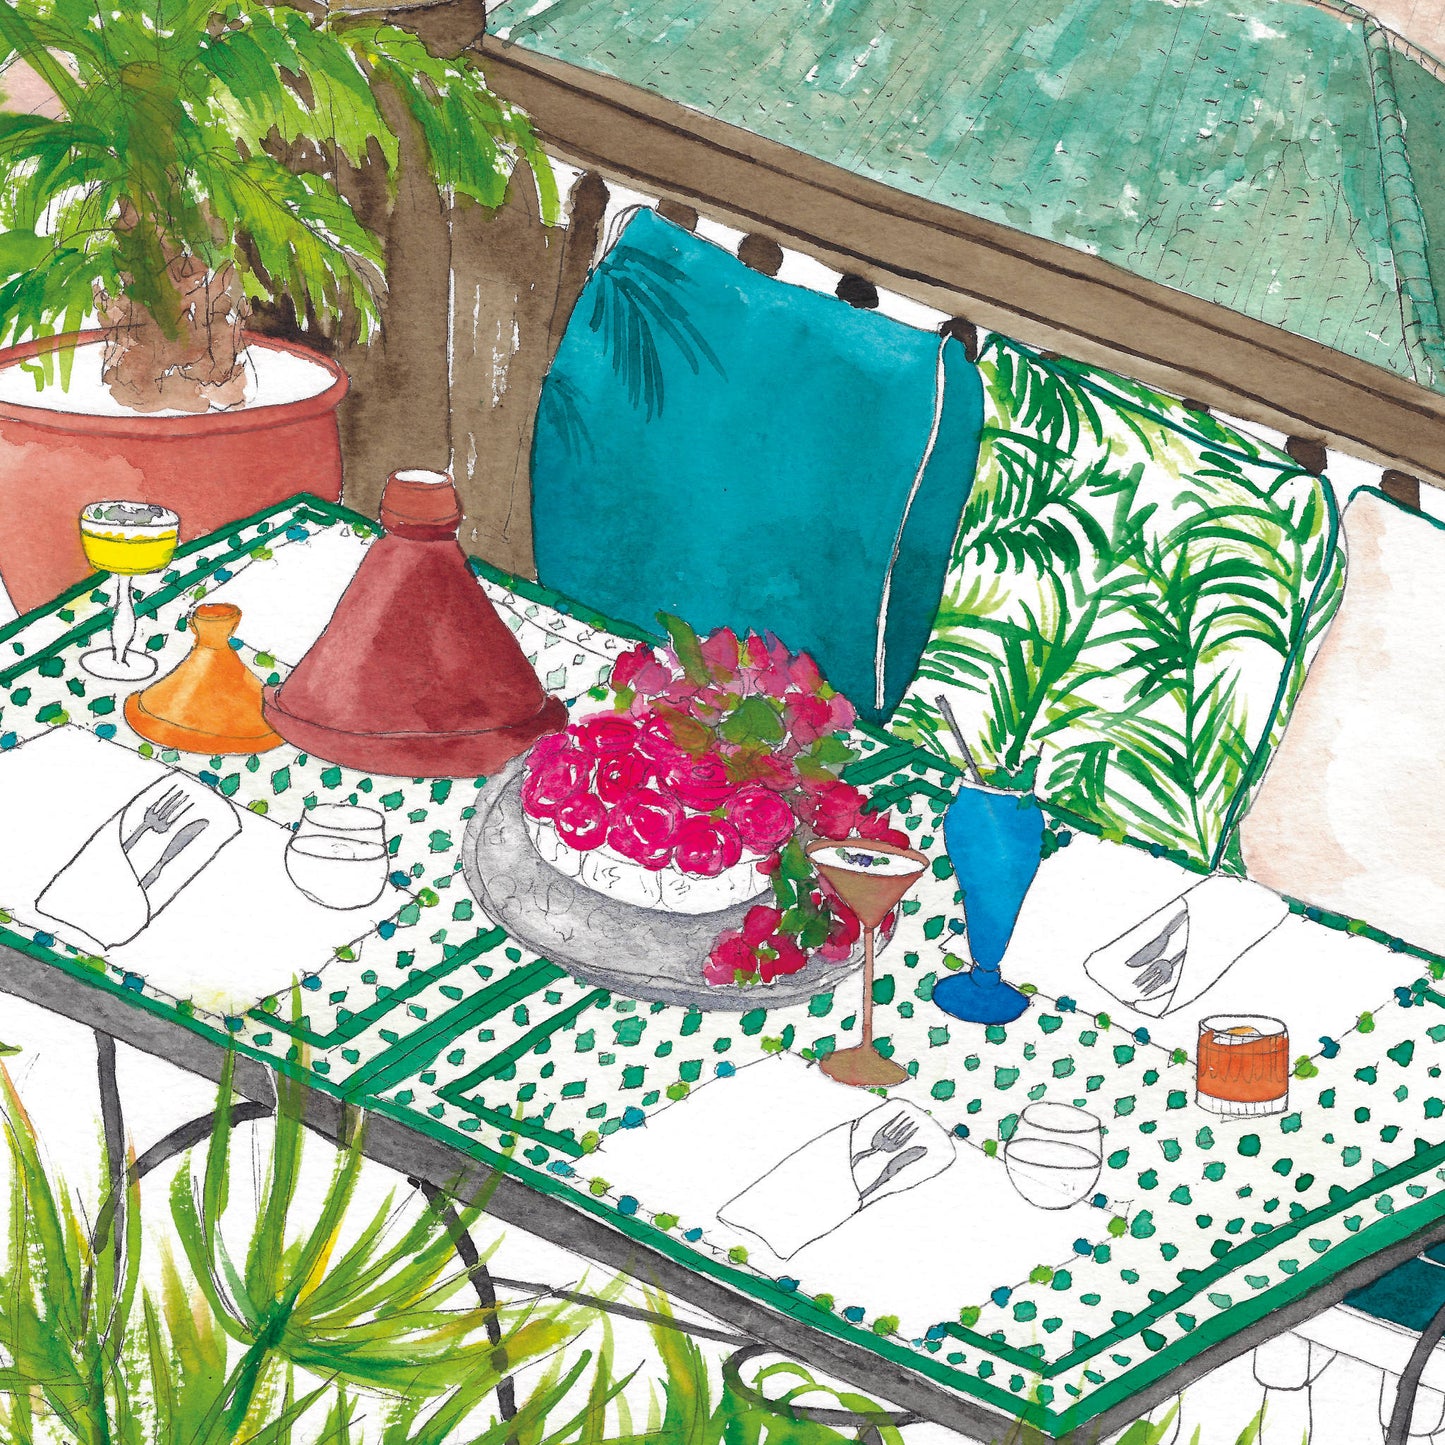 Morocco Hotel Rooftop Print